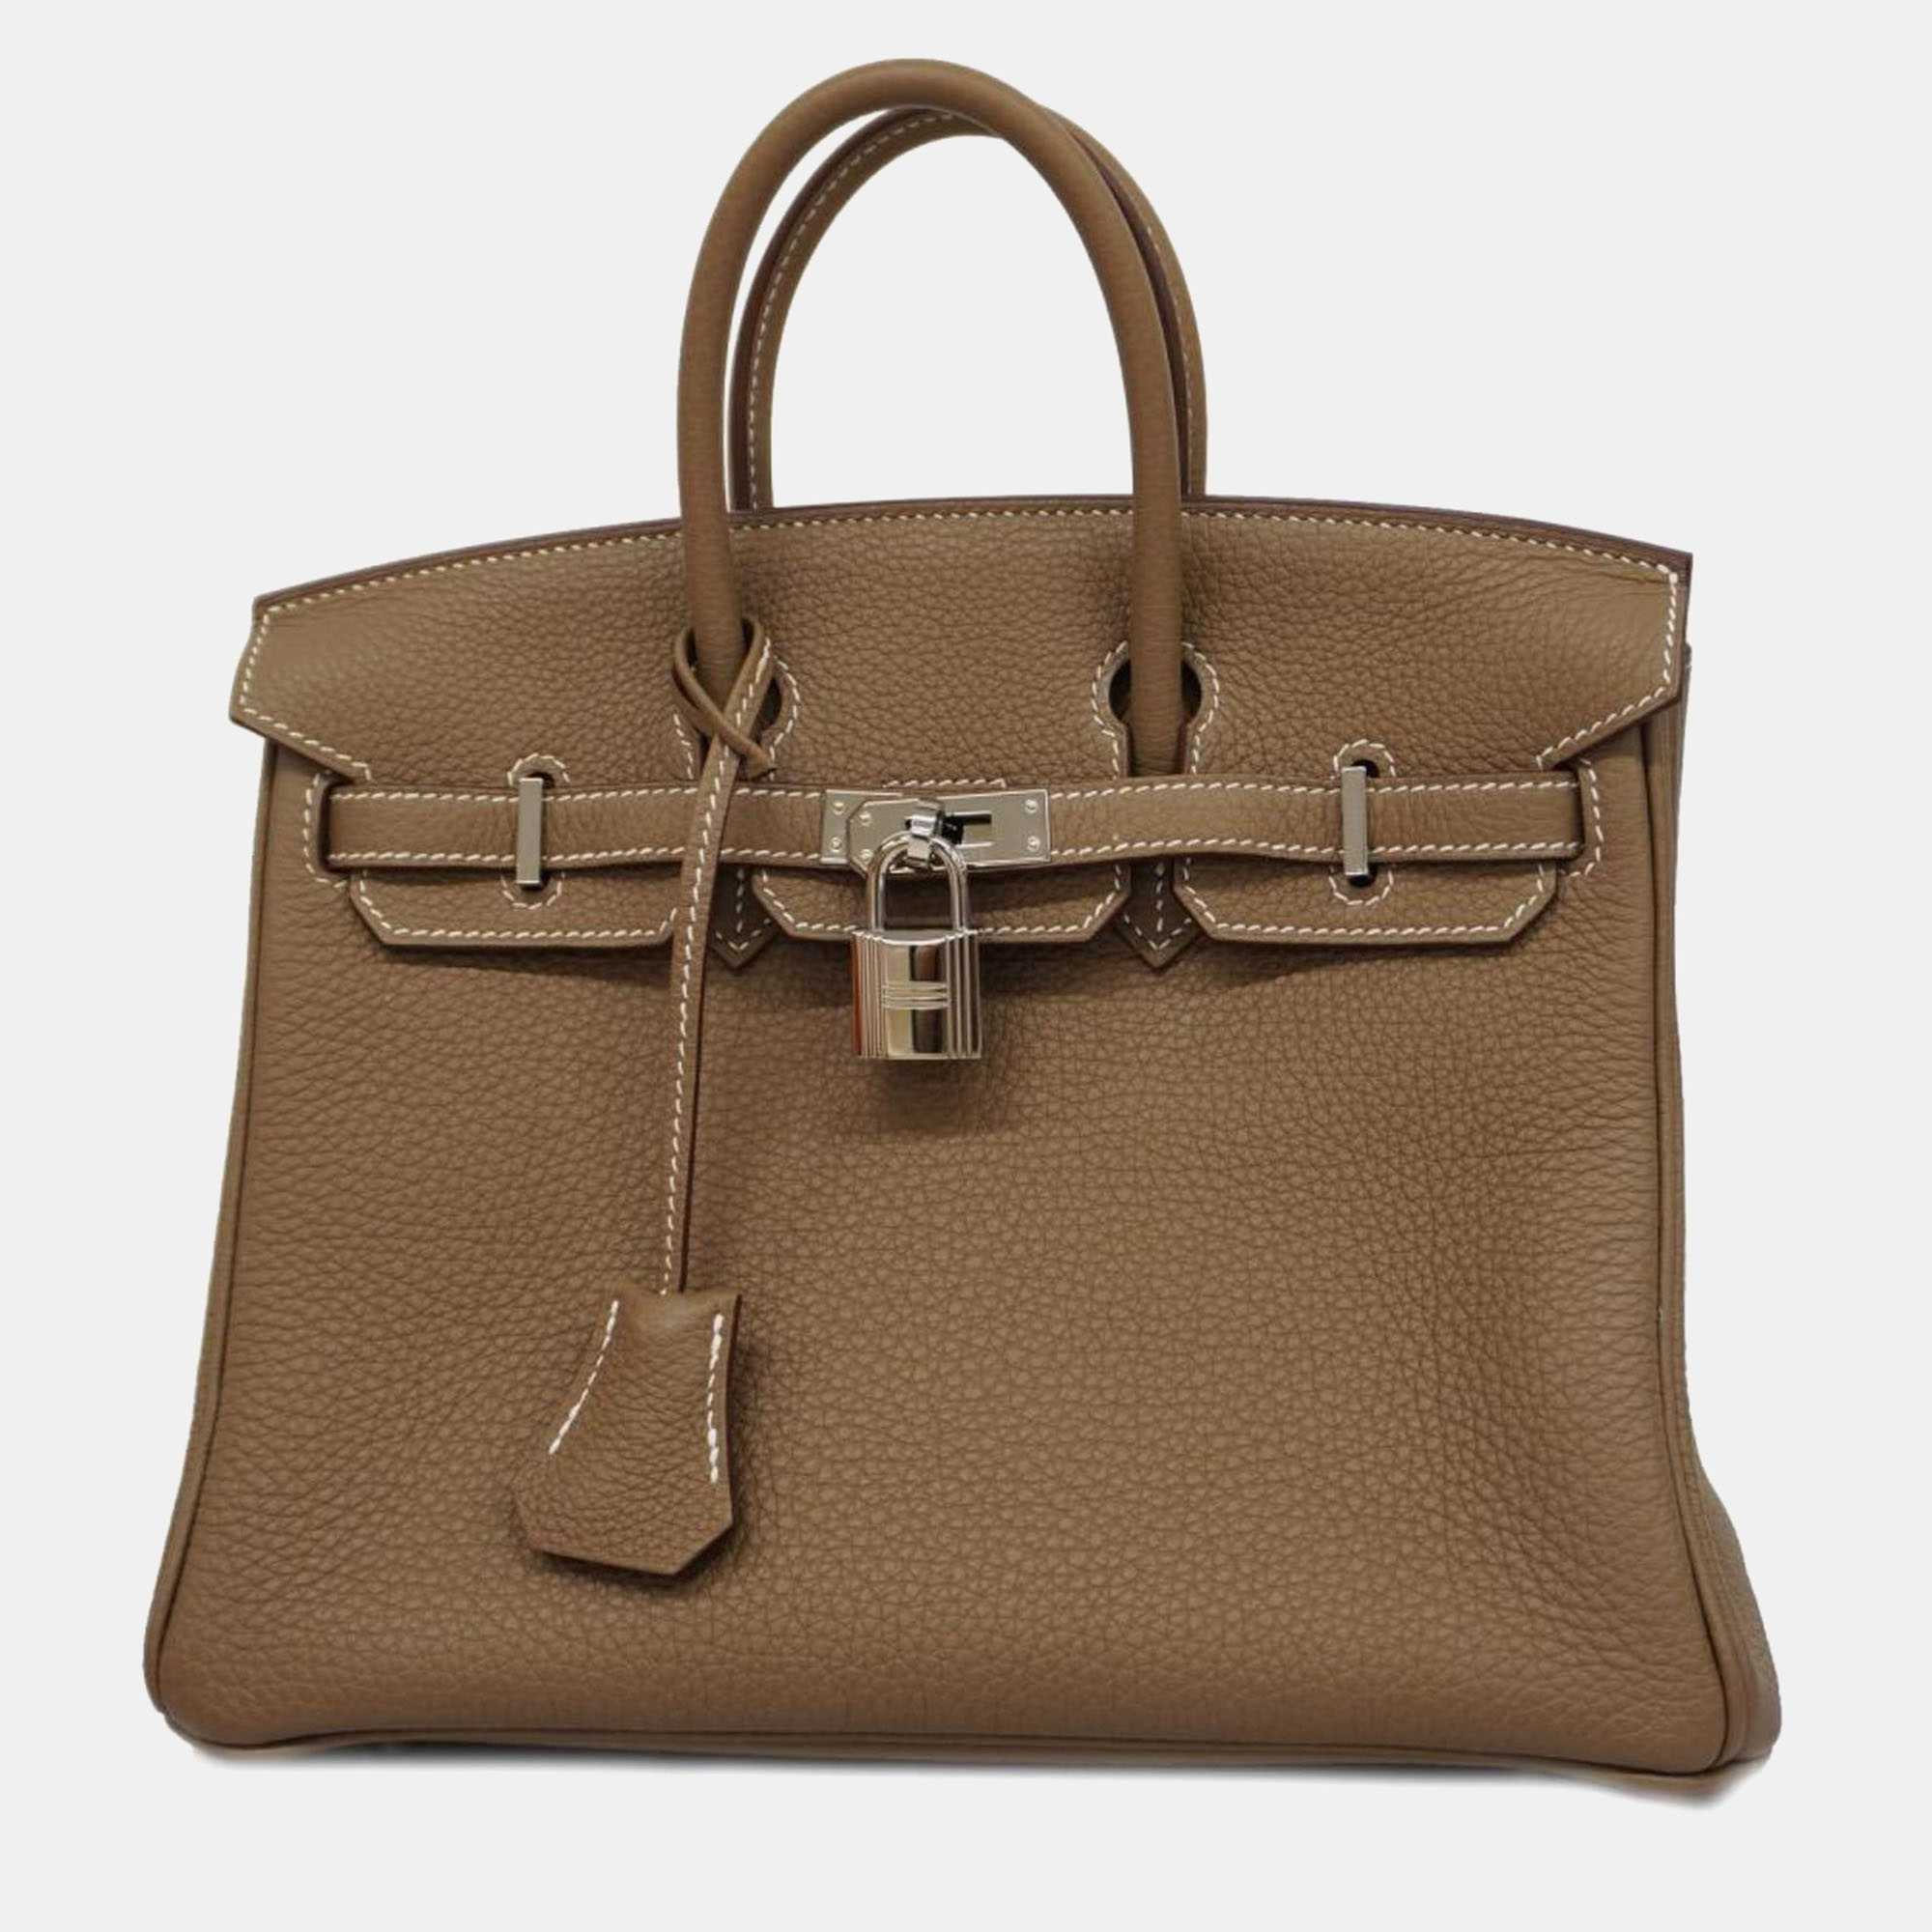 Hermes etoupe taurillon clemence leather birkin 25 tote bag